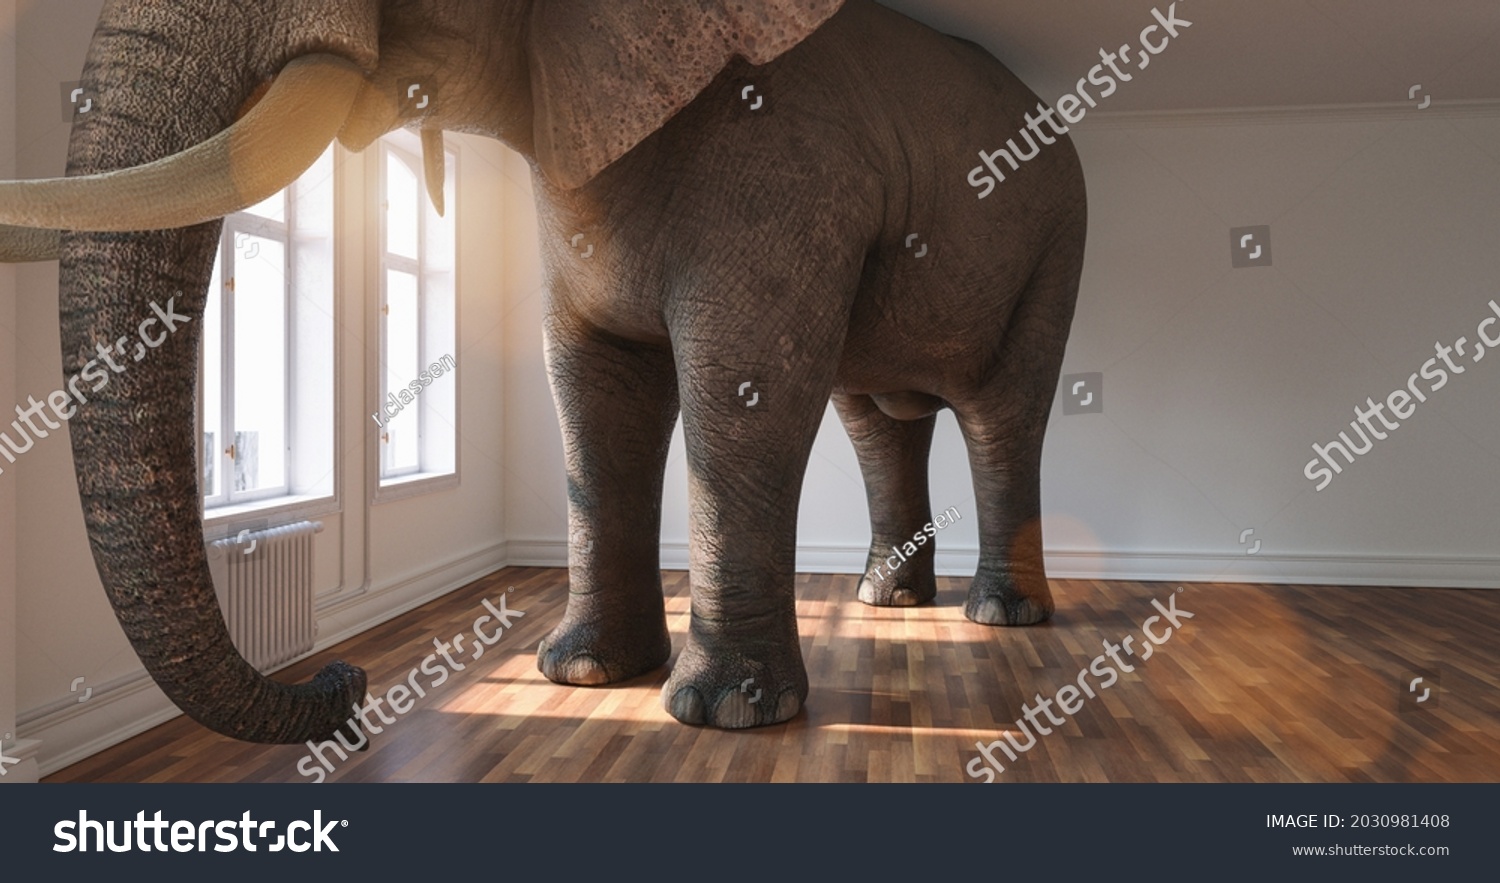 Big elephant calm in a apartment as a funny lack of space and pet concept image #2030981408